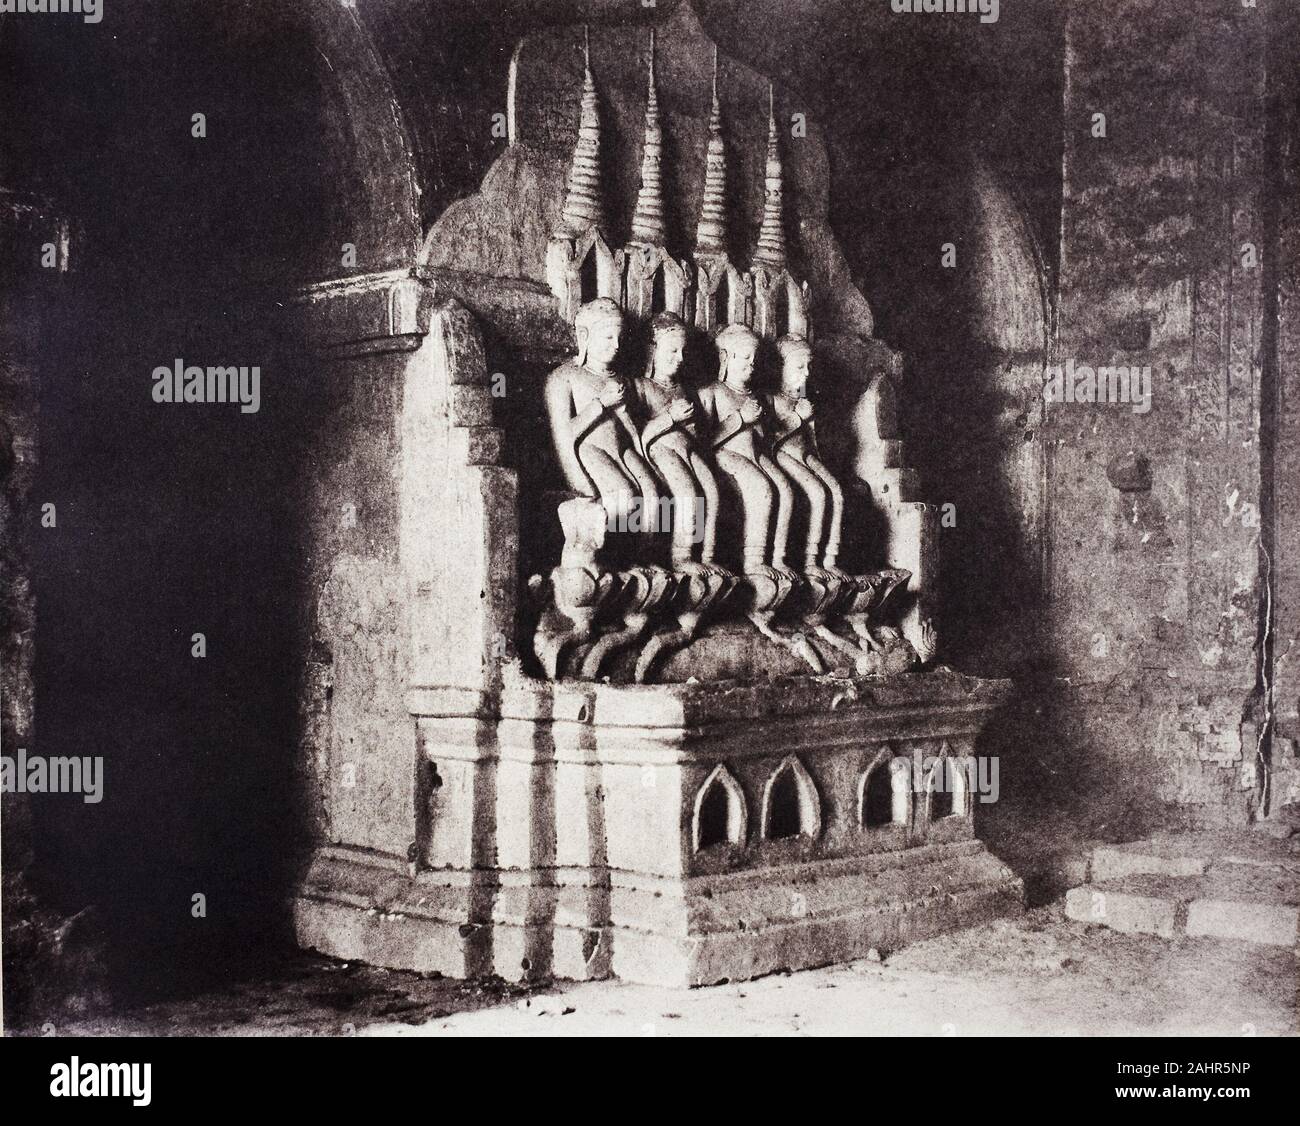 Linnaeus Tripe. No. 23. Pugahm Myo [Pagan]. Figures in Damayangyee Pagoda [Dhamma-yan-gyi].. 1855. England. Salted paper print, from the album Views of Burma (1856) Linnaeus Tripe produced some of the earliest photographs ever made of British India and Burma. The British ruled large parts of India through the East India Company, a corporation with its own private armies and governmental functions. Tripe rose through the ranks of the Company’s army and began to experiment with photography in the early 1850s, photographing temples and other Indian monuments. In 1855, James Broun-Ramsay, the Brit Stock Photo